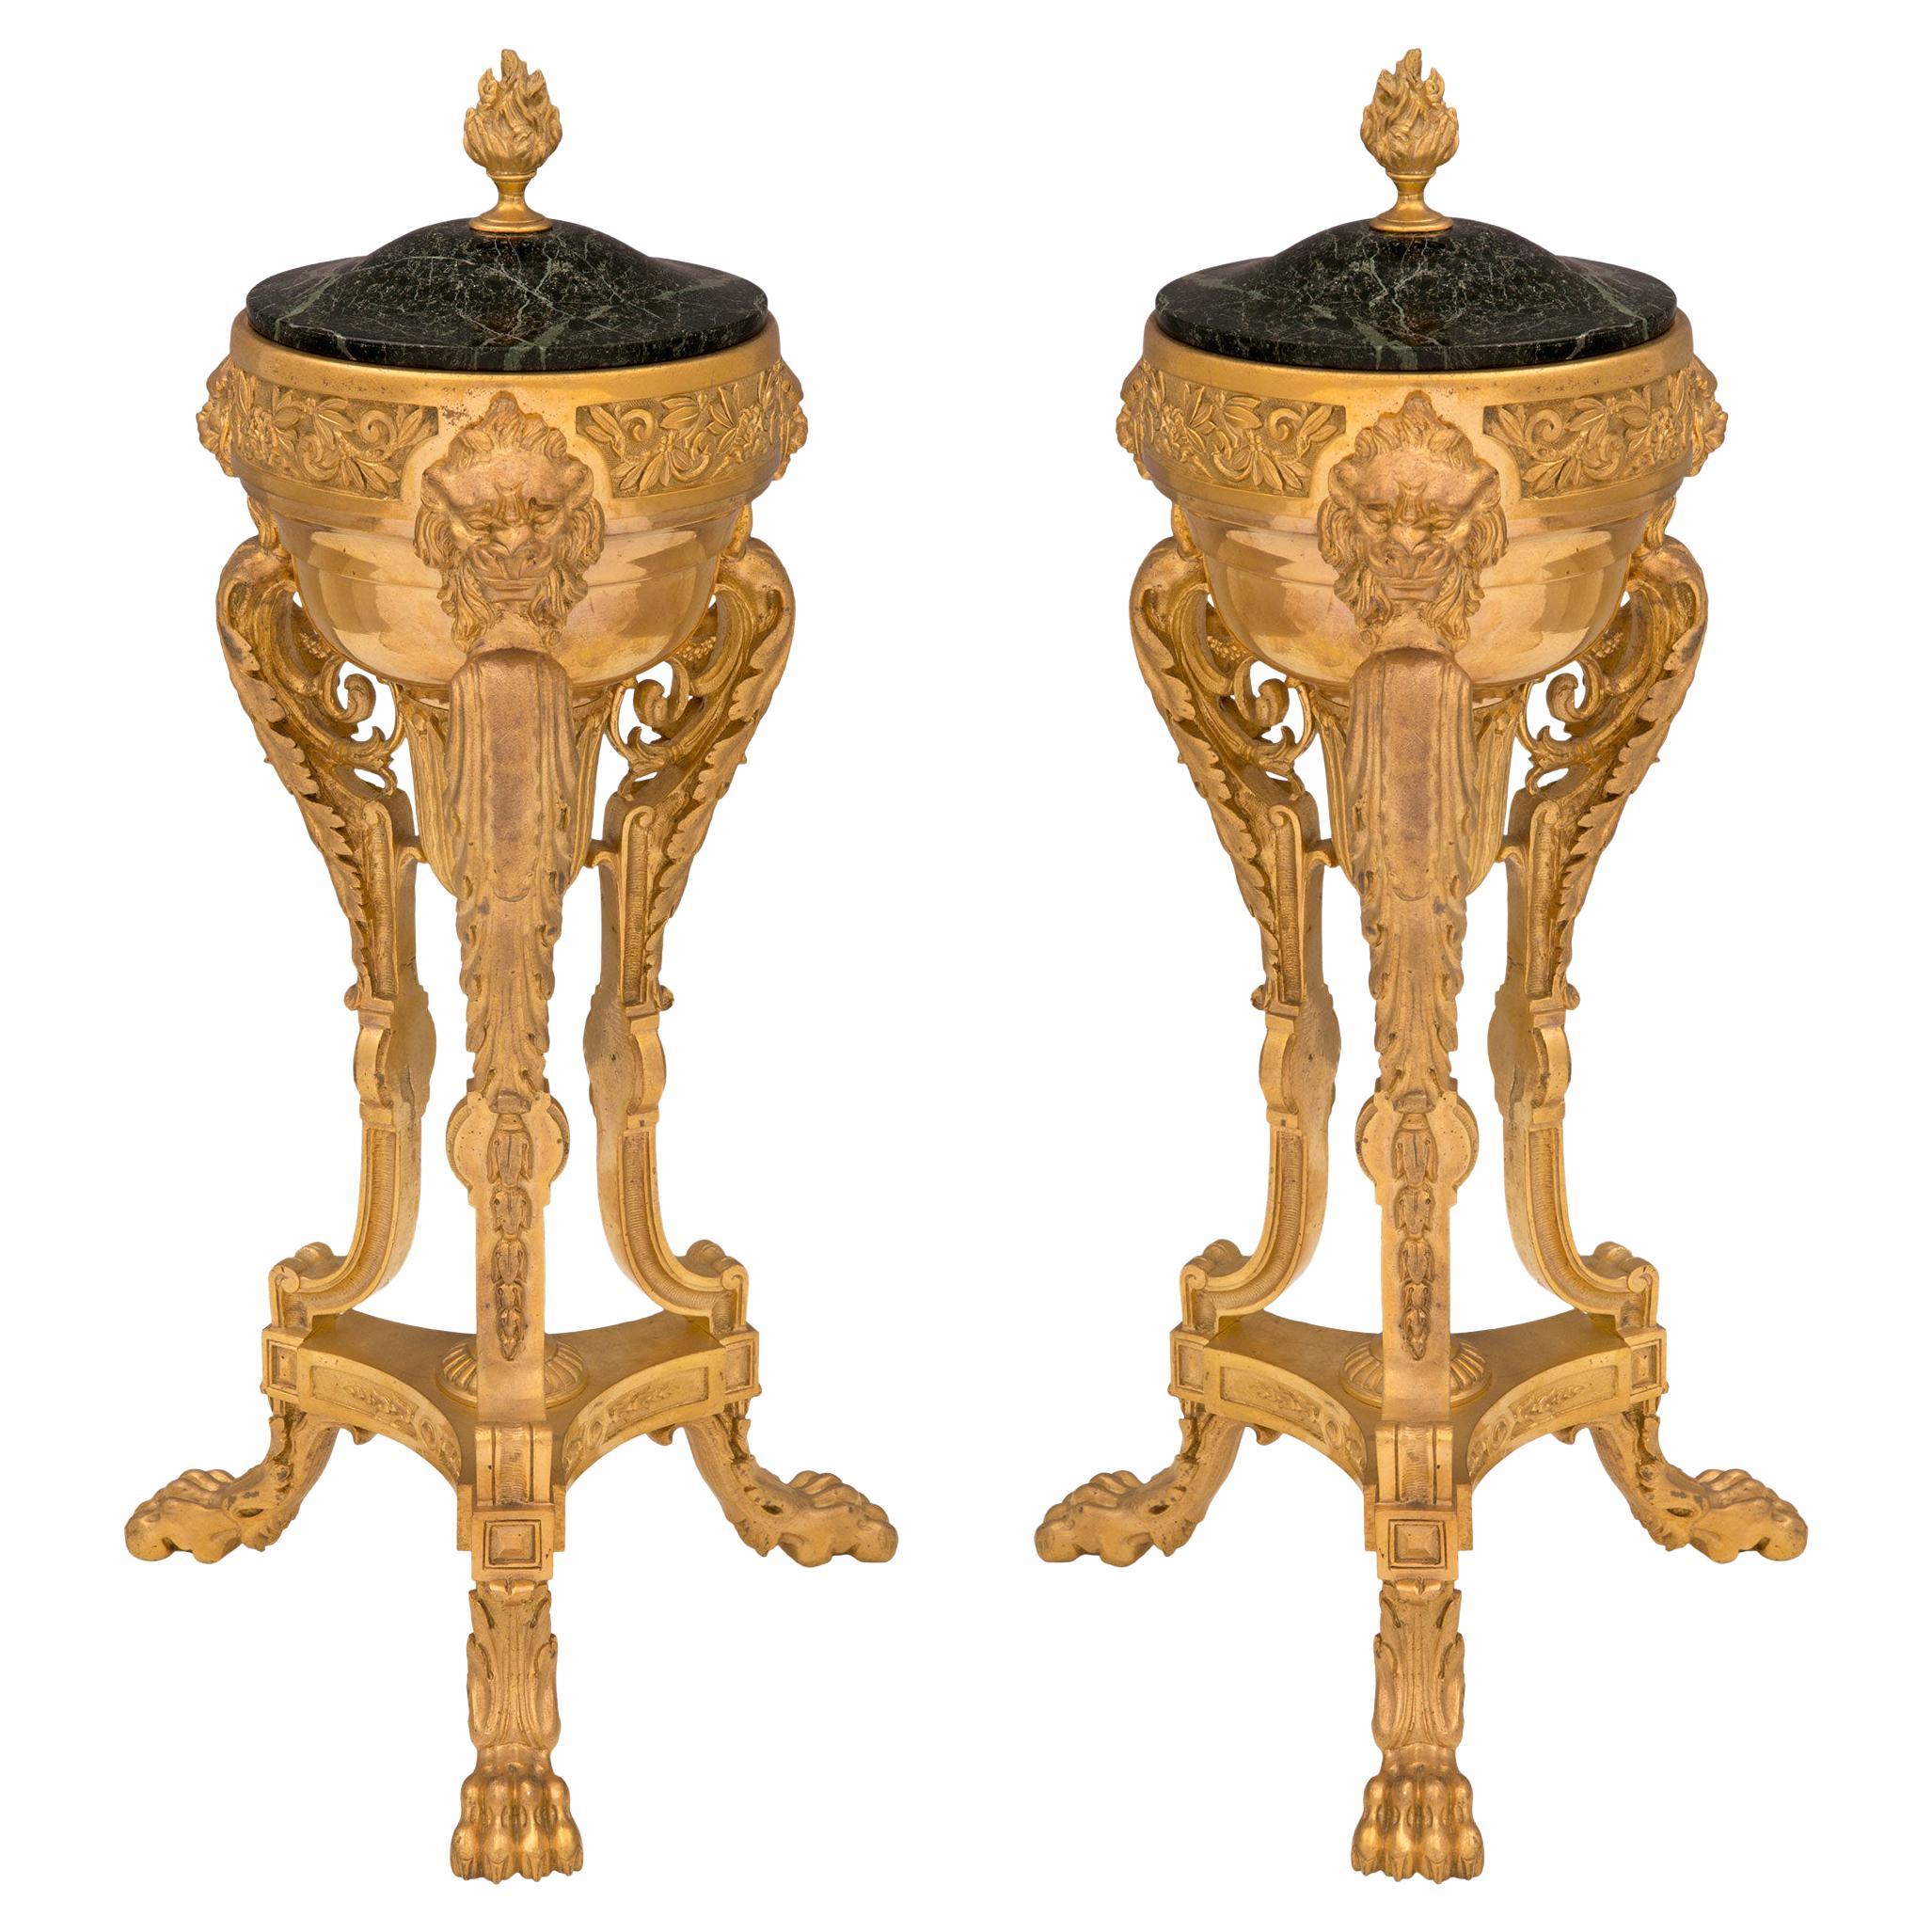 Pair of French 19th Century Neoclassical Style Ormolu and Marble Lidded Urns